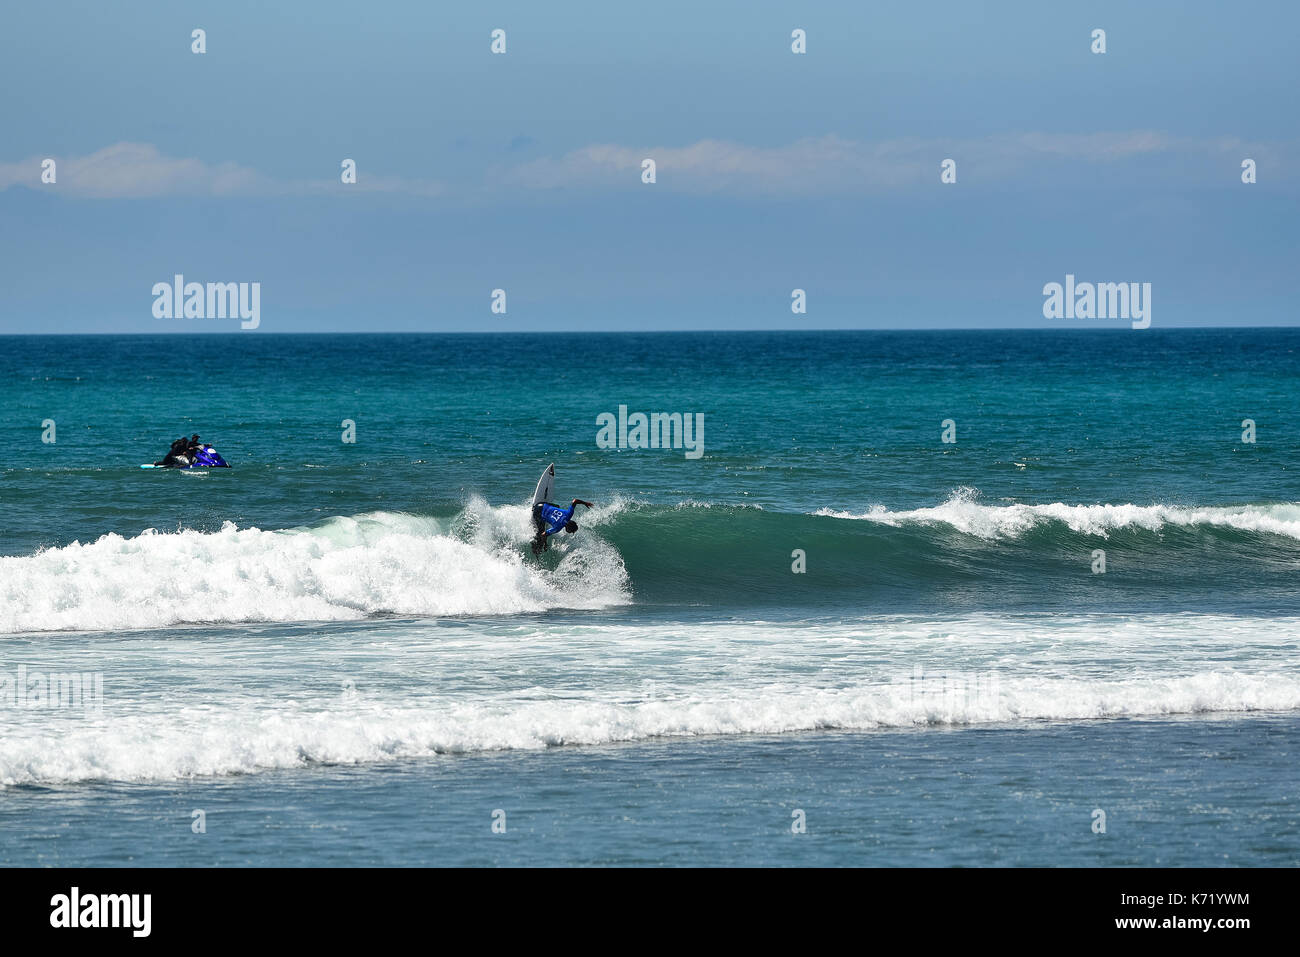 San Clemente, USA. 13 September, 2017.  Surfers compete head to head during the 2017 Hurley Pro surf contest at Lower Trestles, San Onofre State Park, CA. Surfer: Jeremy Flores (FRA). Credit: Benjamin Ginsberg/Alamy Live News. Stock Photo